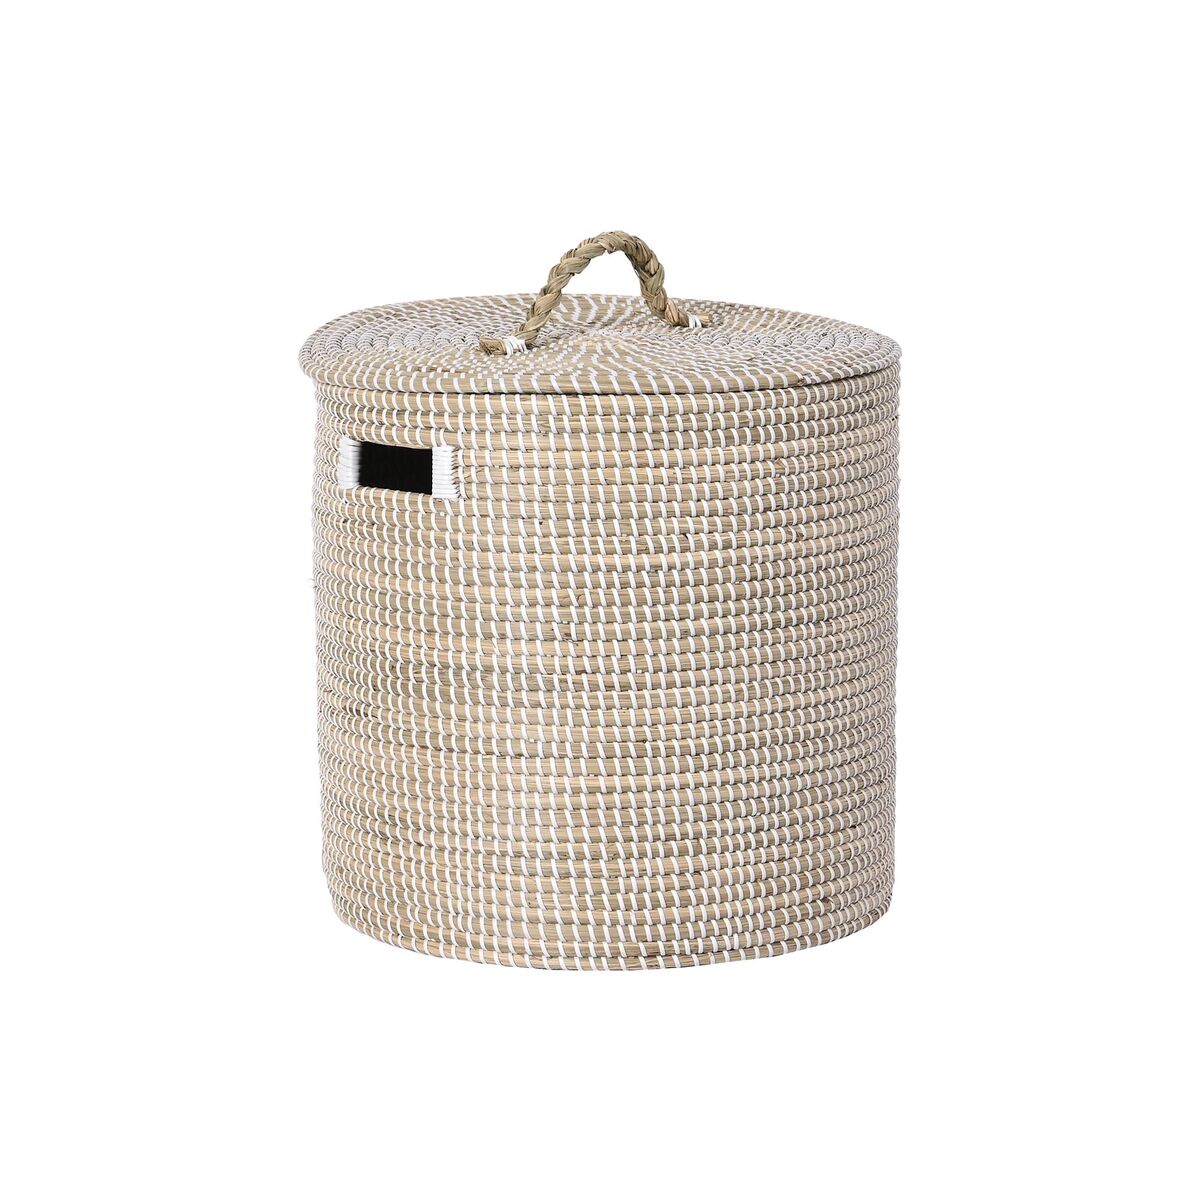 Decorative basket with lid in Seagrass (42 x 42 x 48 cm)